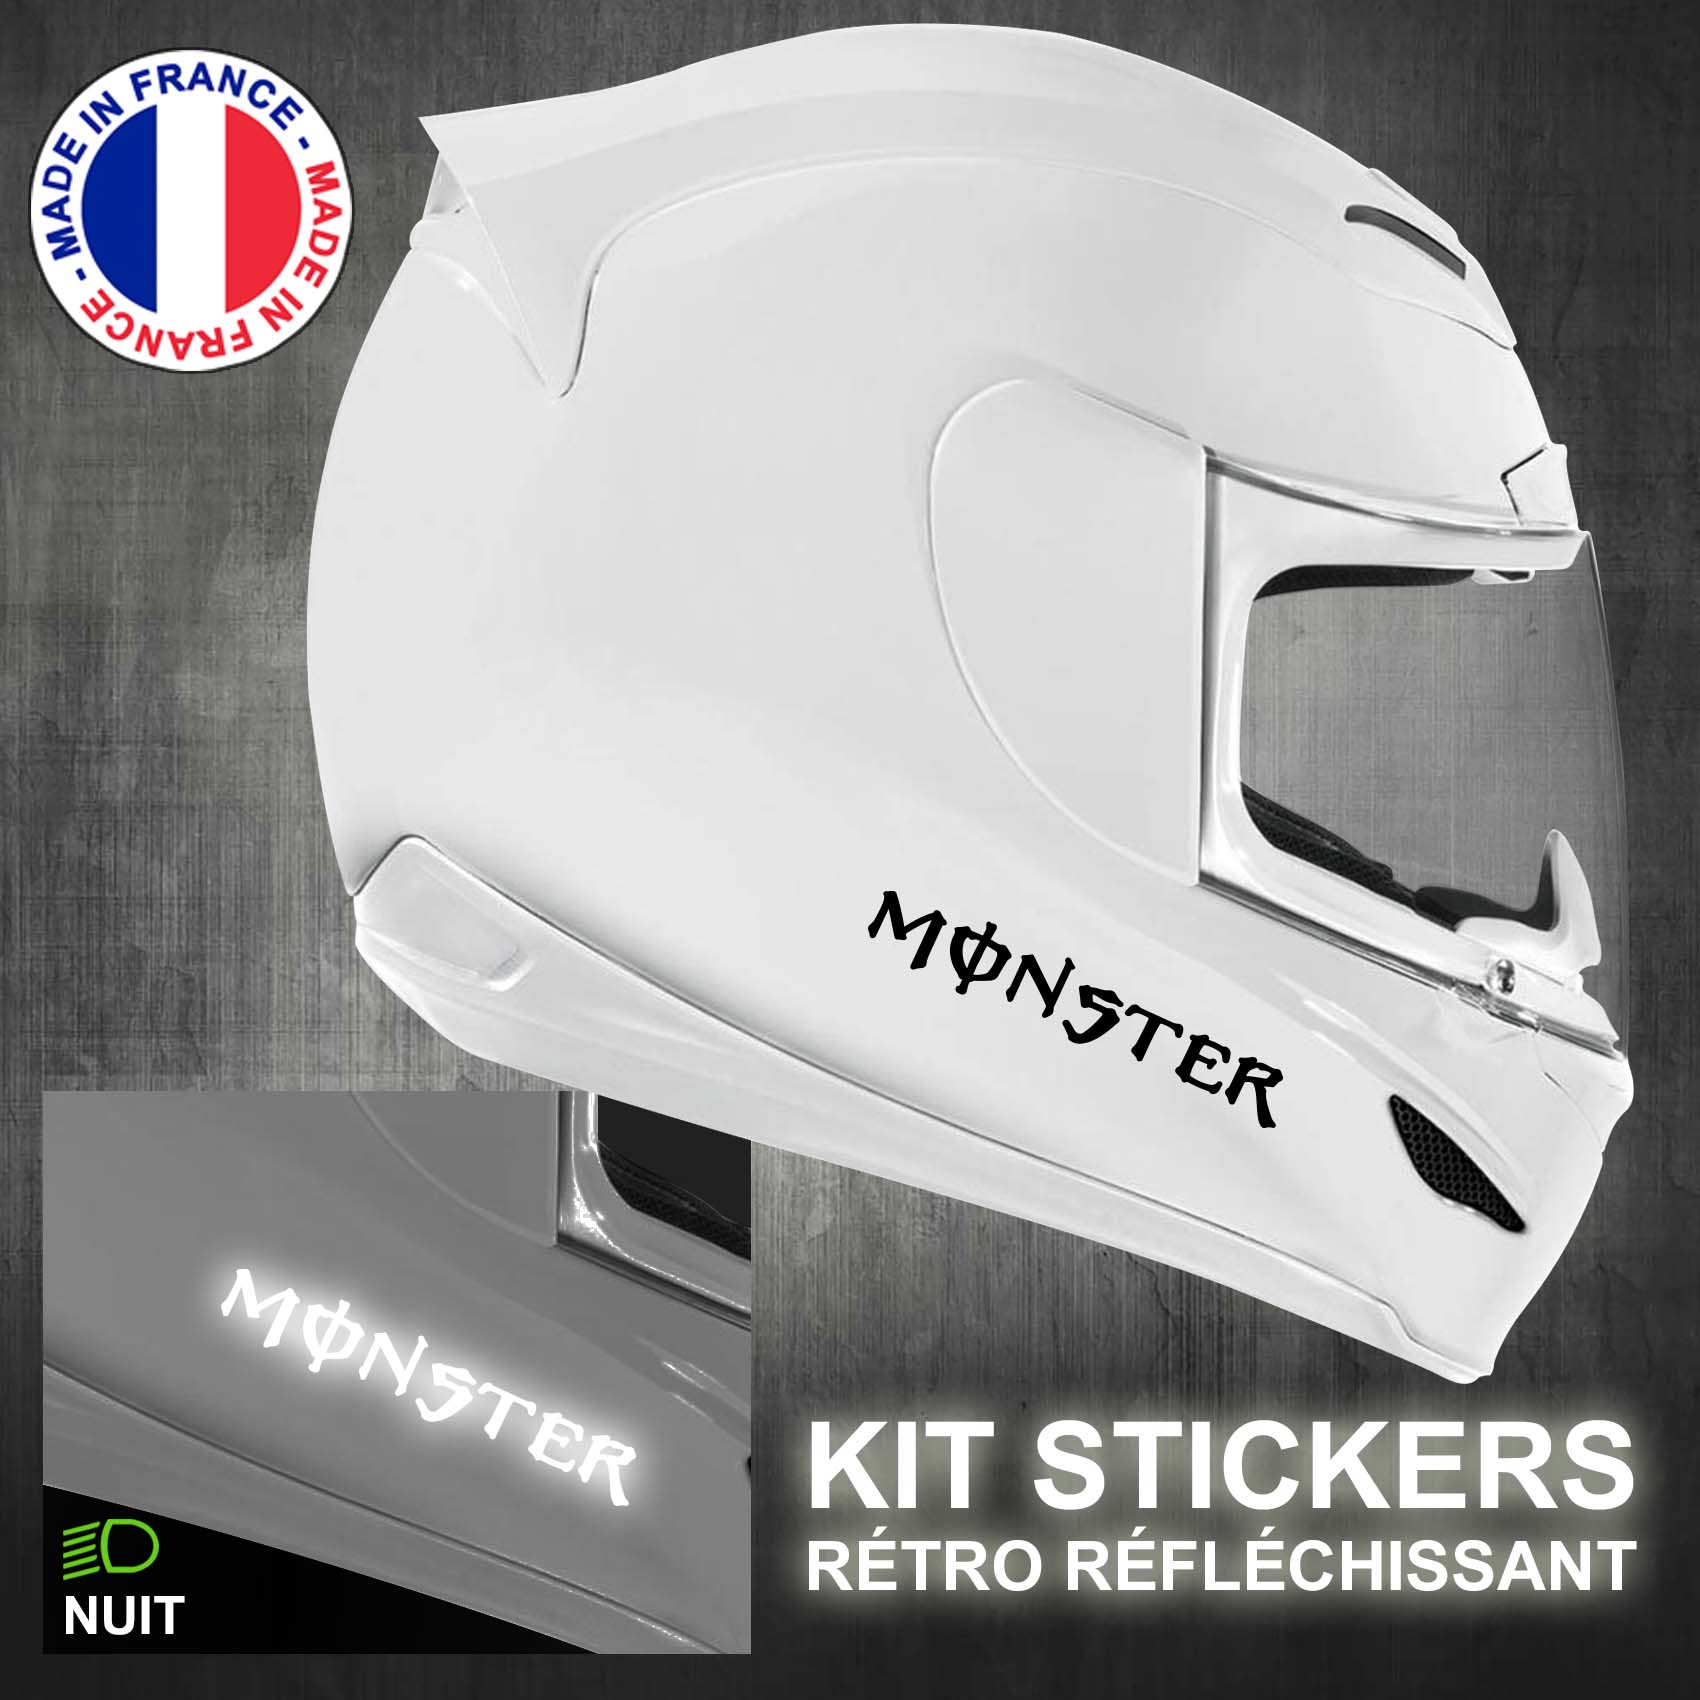 stickers-casque-moto-monster-ref3-retro-reflechissant-autocollant-moto-velo-tuning-racing-route-sticker-casques-adhesif-scooter-nuit-securite-decals-personnalise-personnalisable-min